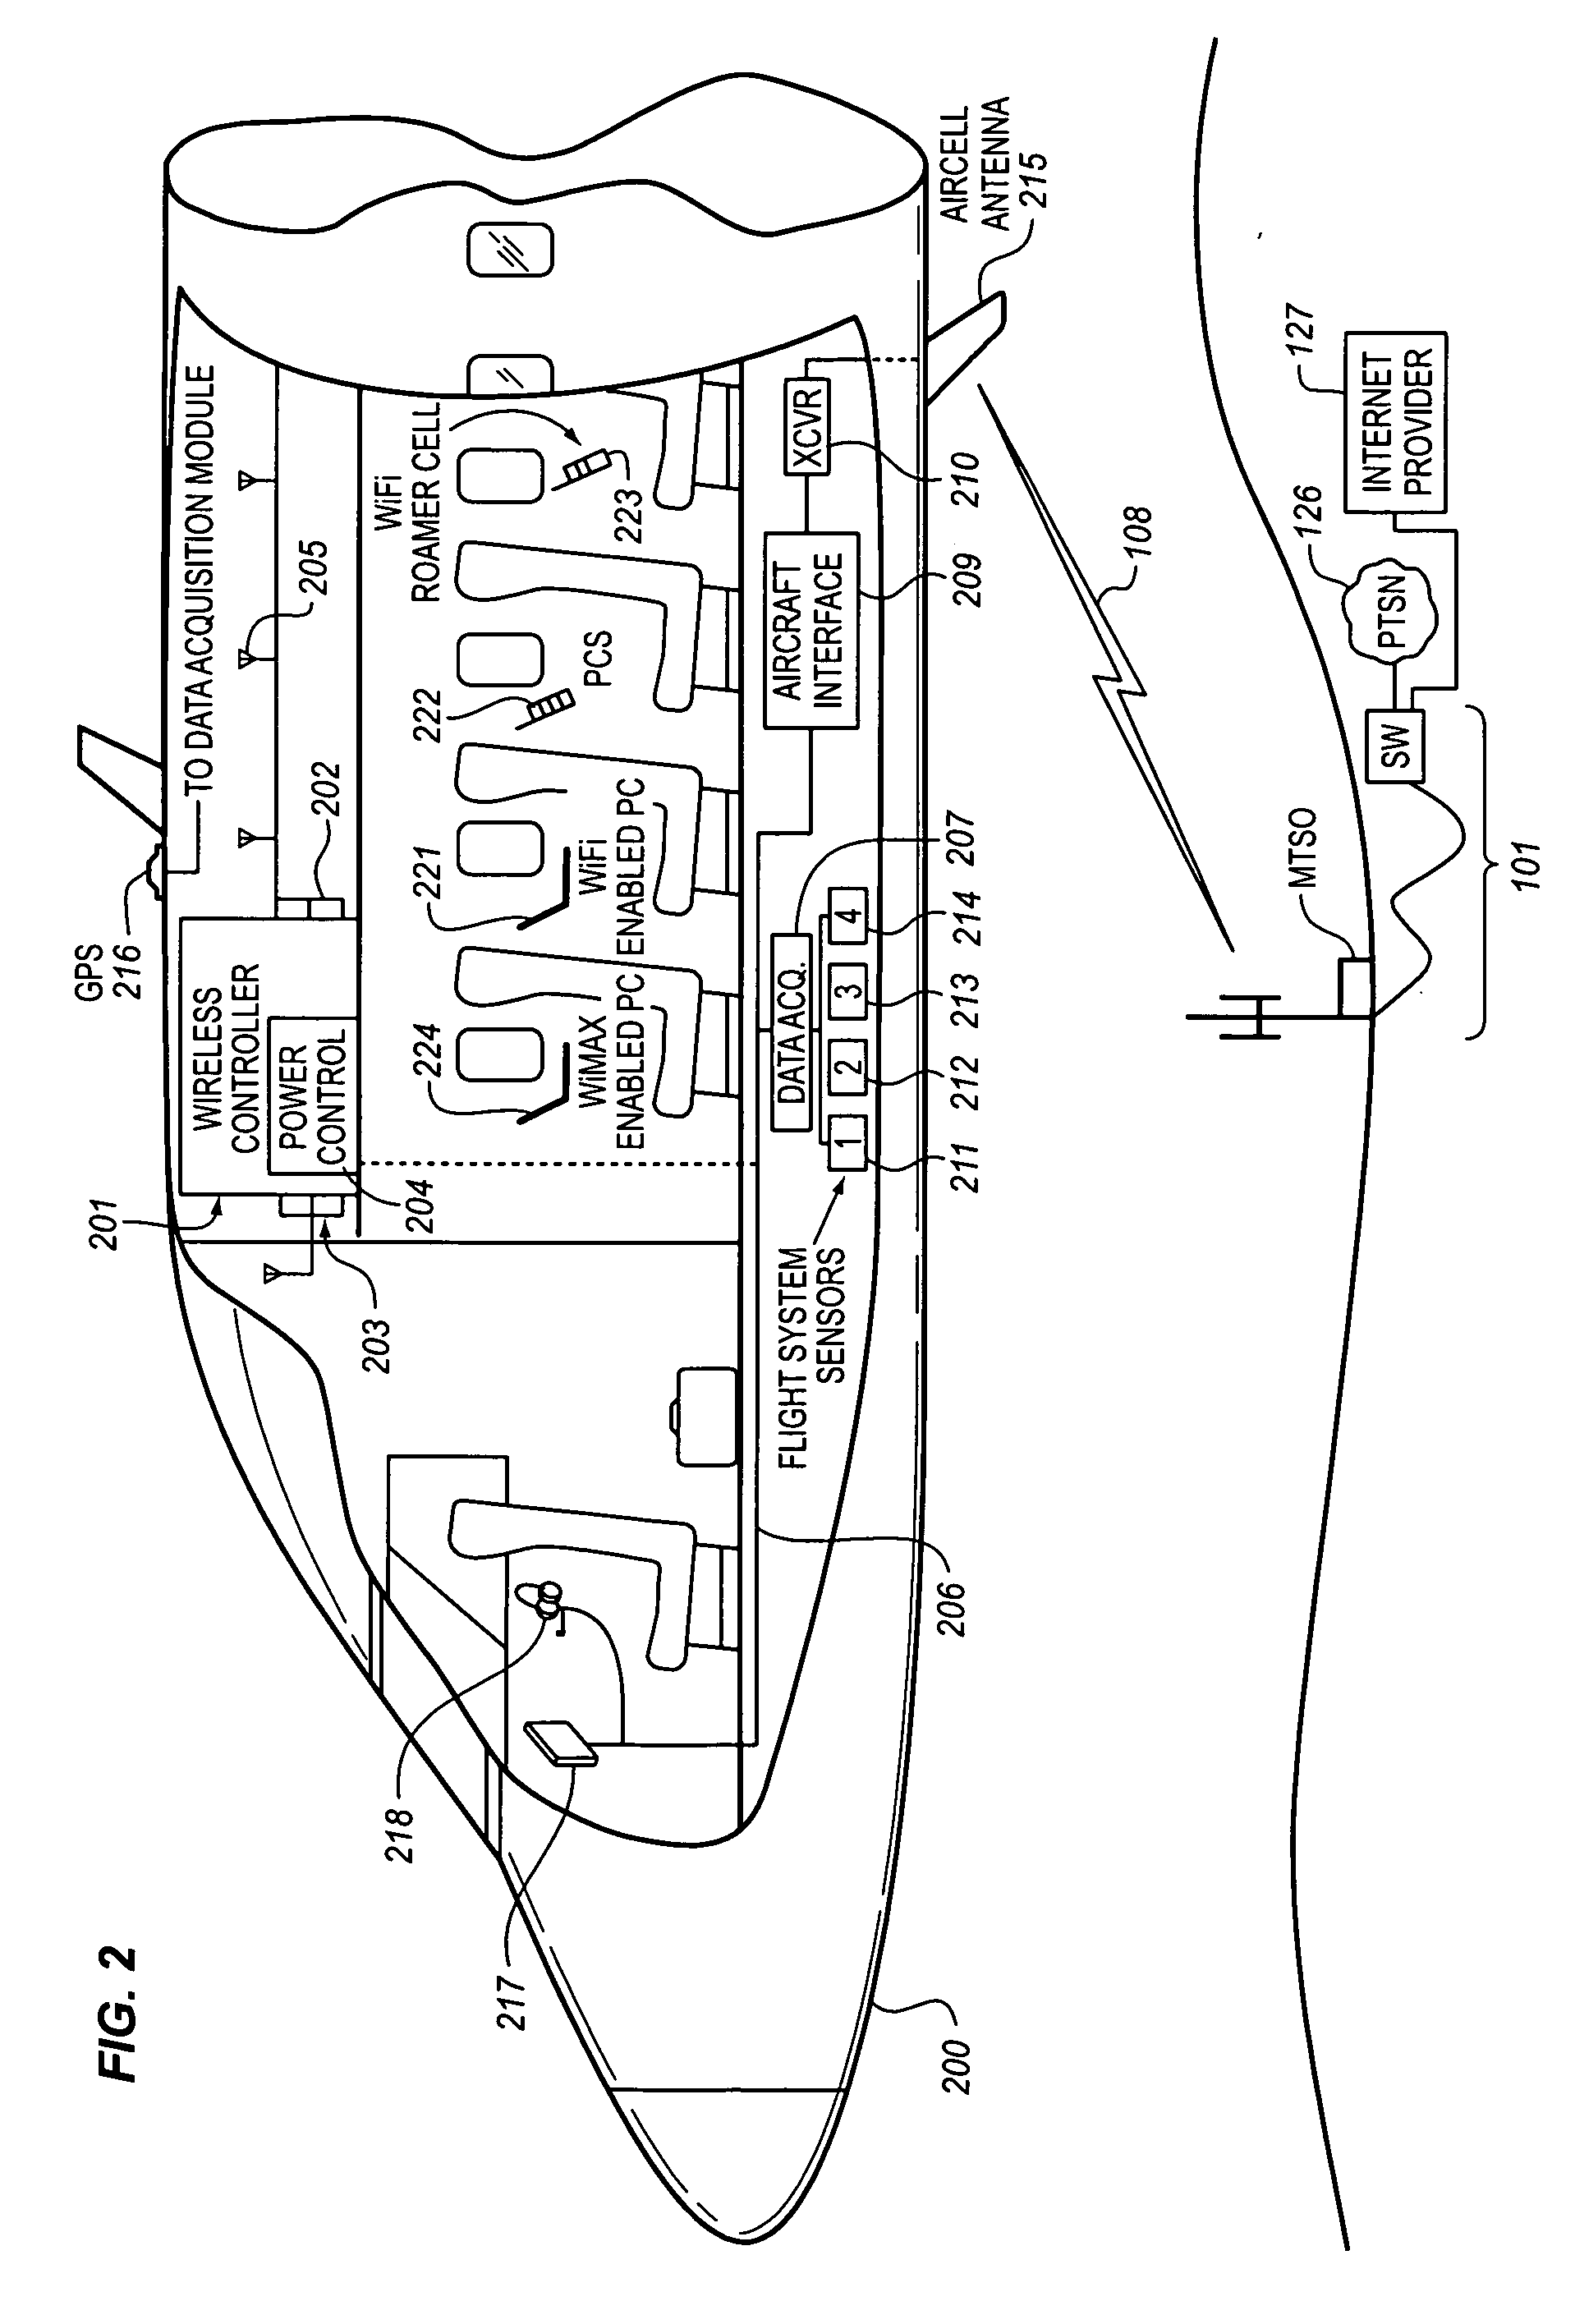 System for customizing electronic content for delivery to a passenger in an airborne wireless cellular network